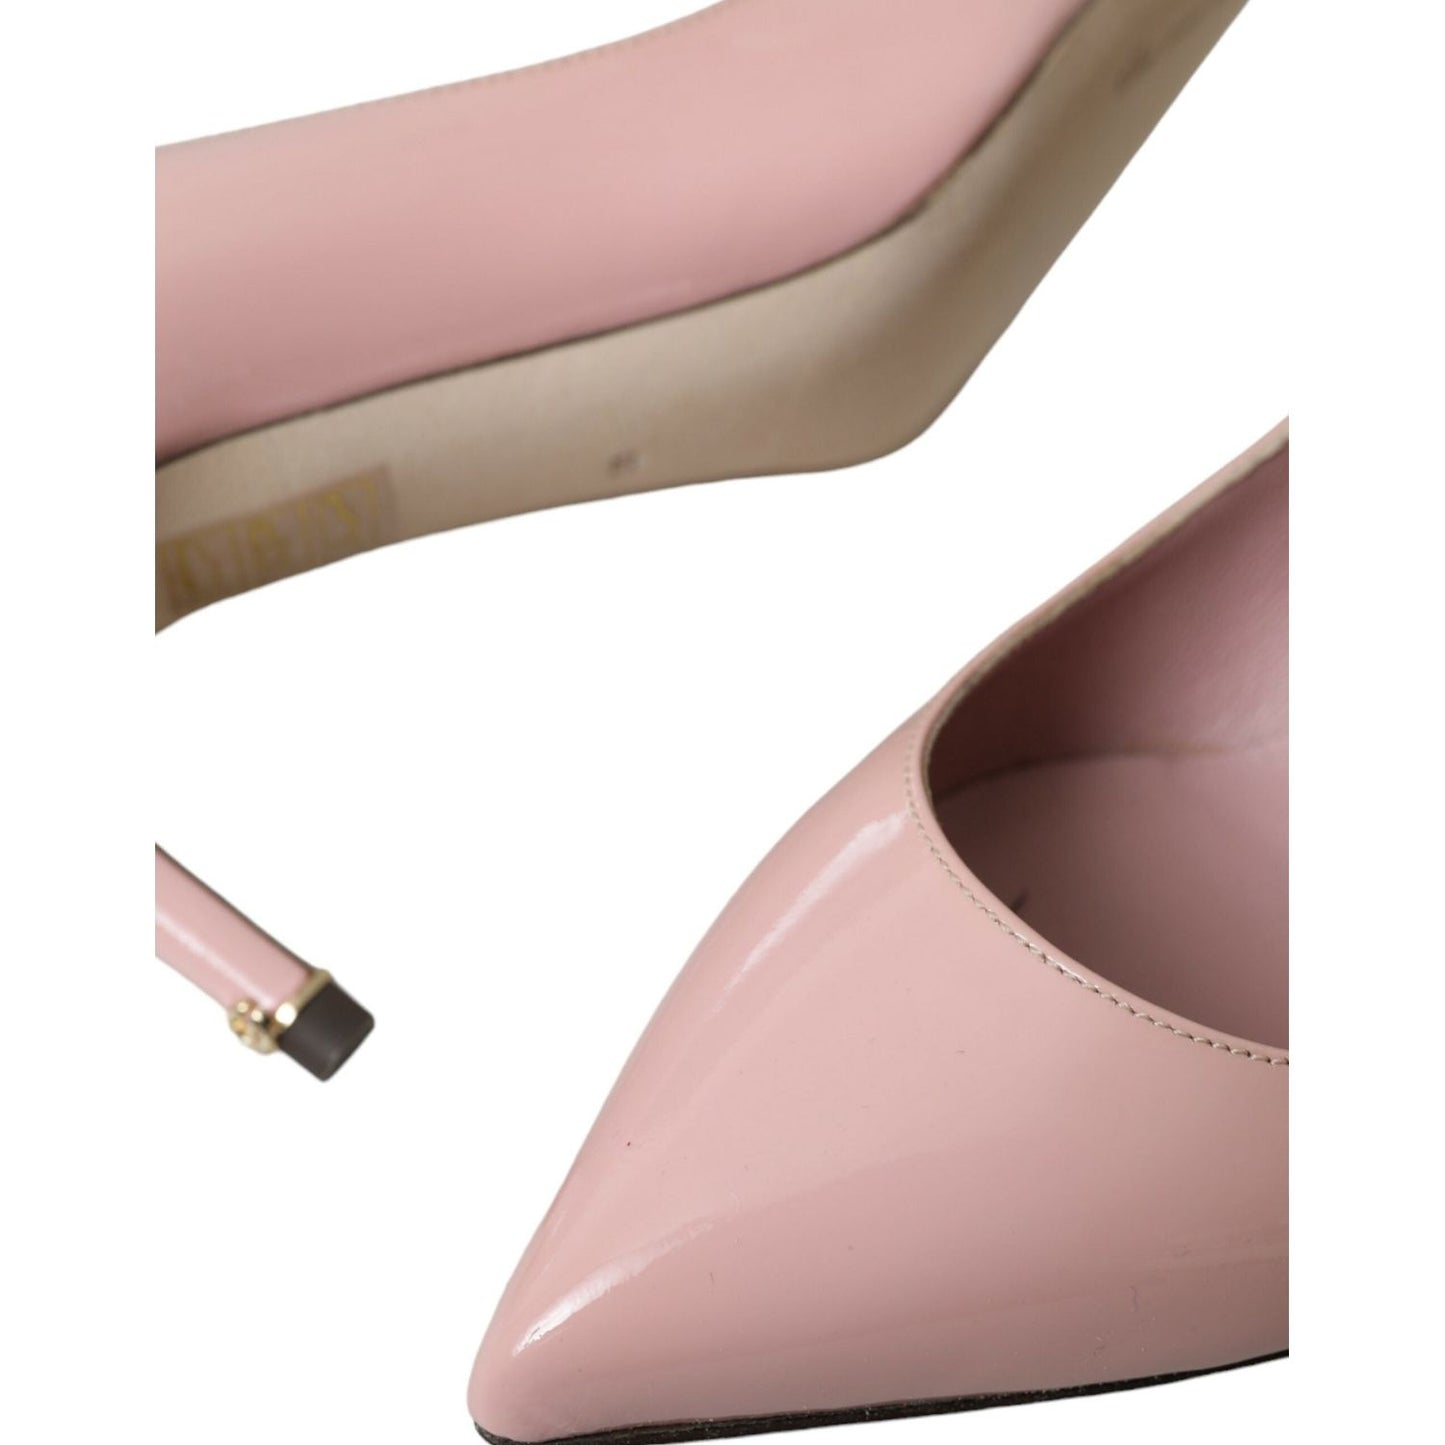 Dolce & Gabbana Light Pink Patent Leather Heels Pumps Shoes light-pink-patent-leather-heels-pumps-shoes